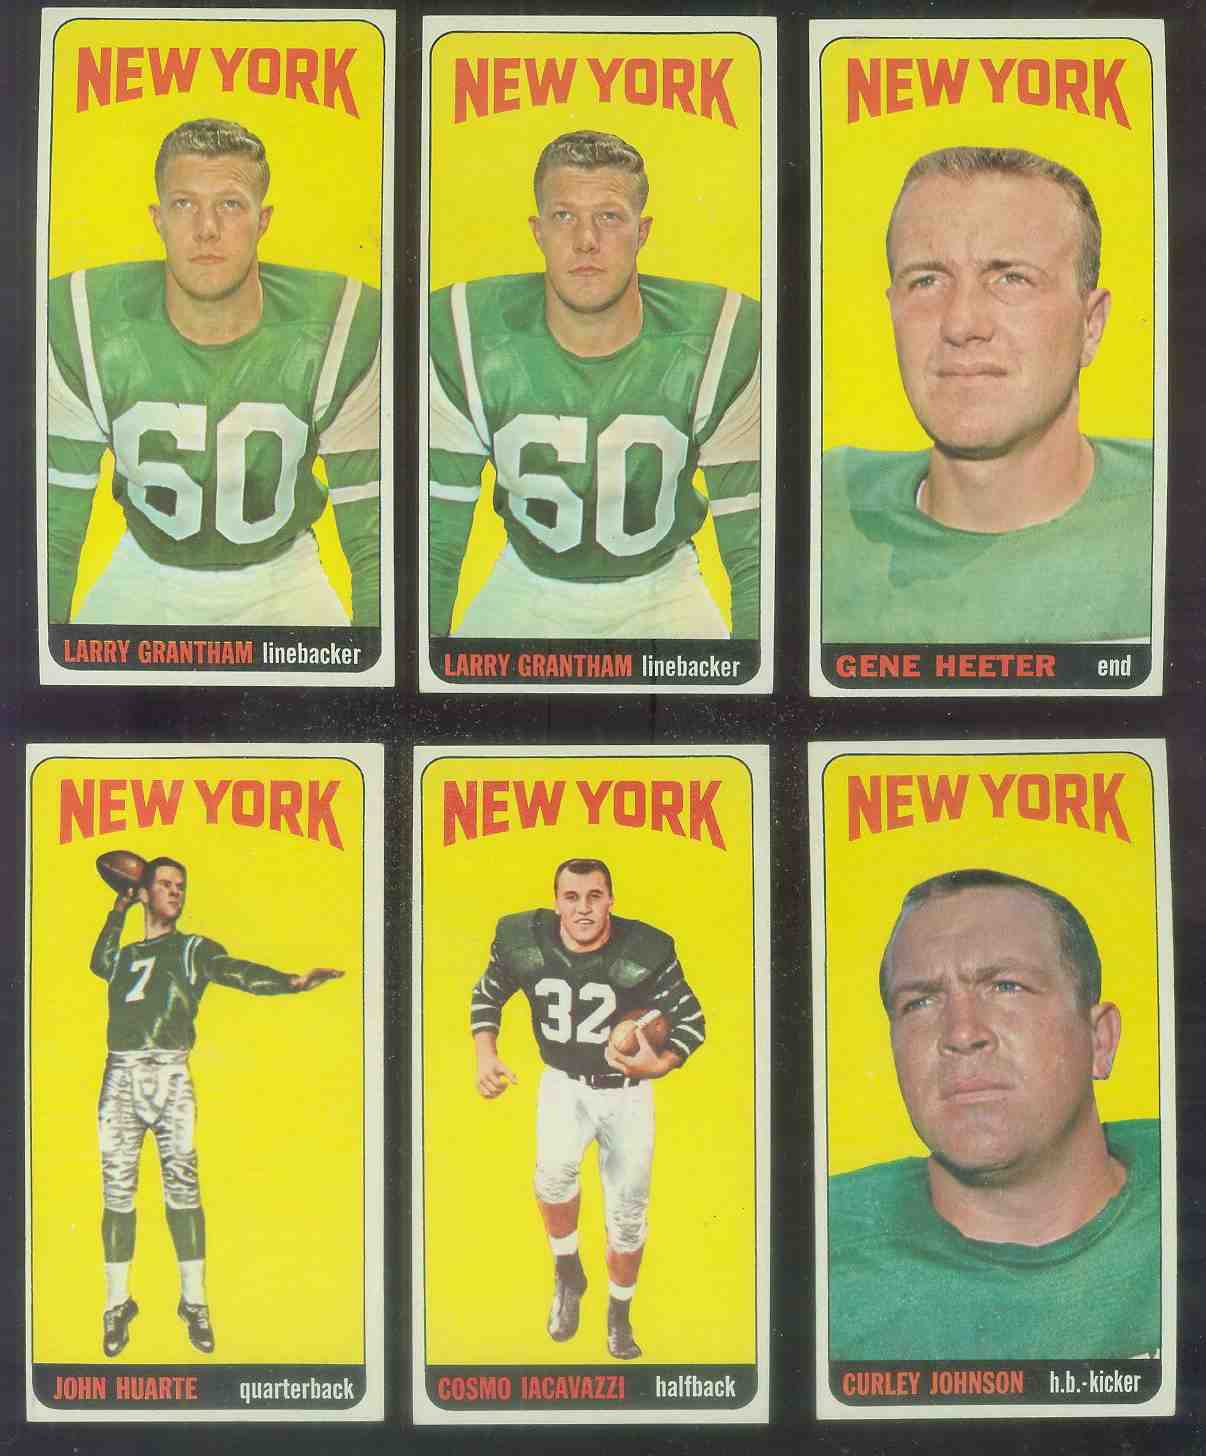 1965 Topps FB #119 Curley Johnson (New York Jets) Football cards value